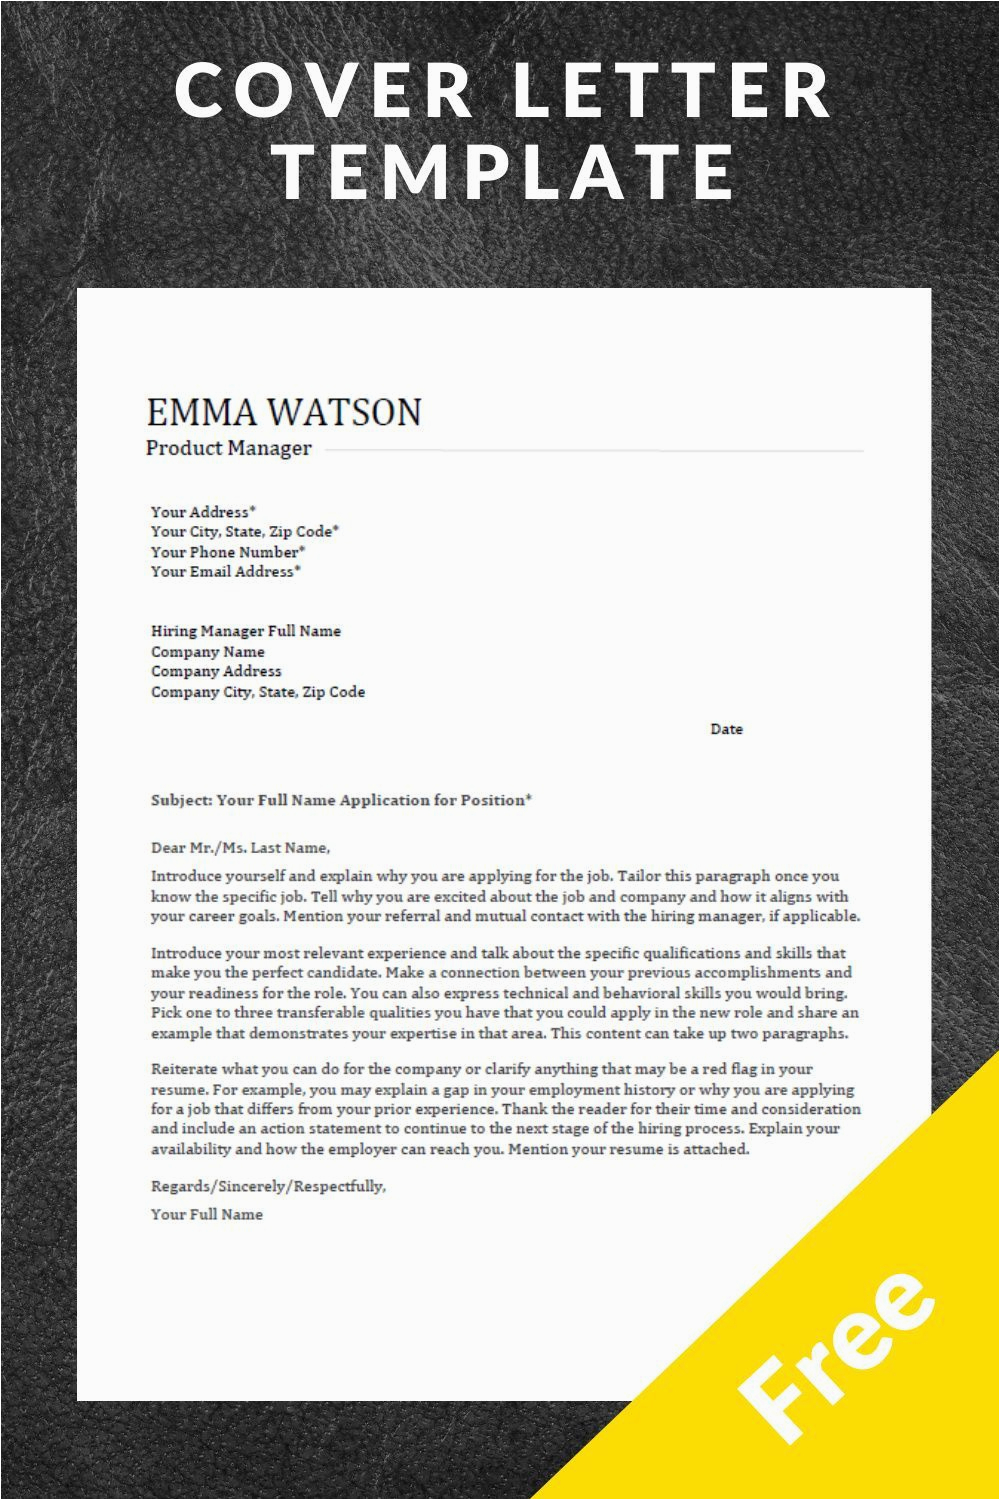 Resume Cover Letter Template Free Download Cover Letter Template Download for Free